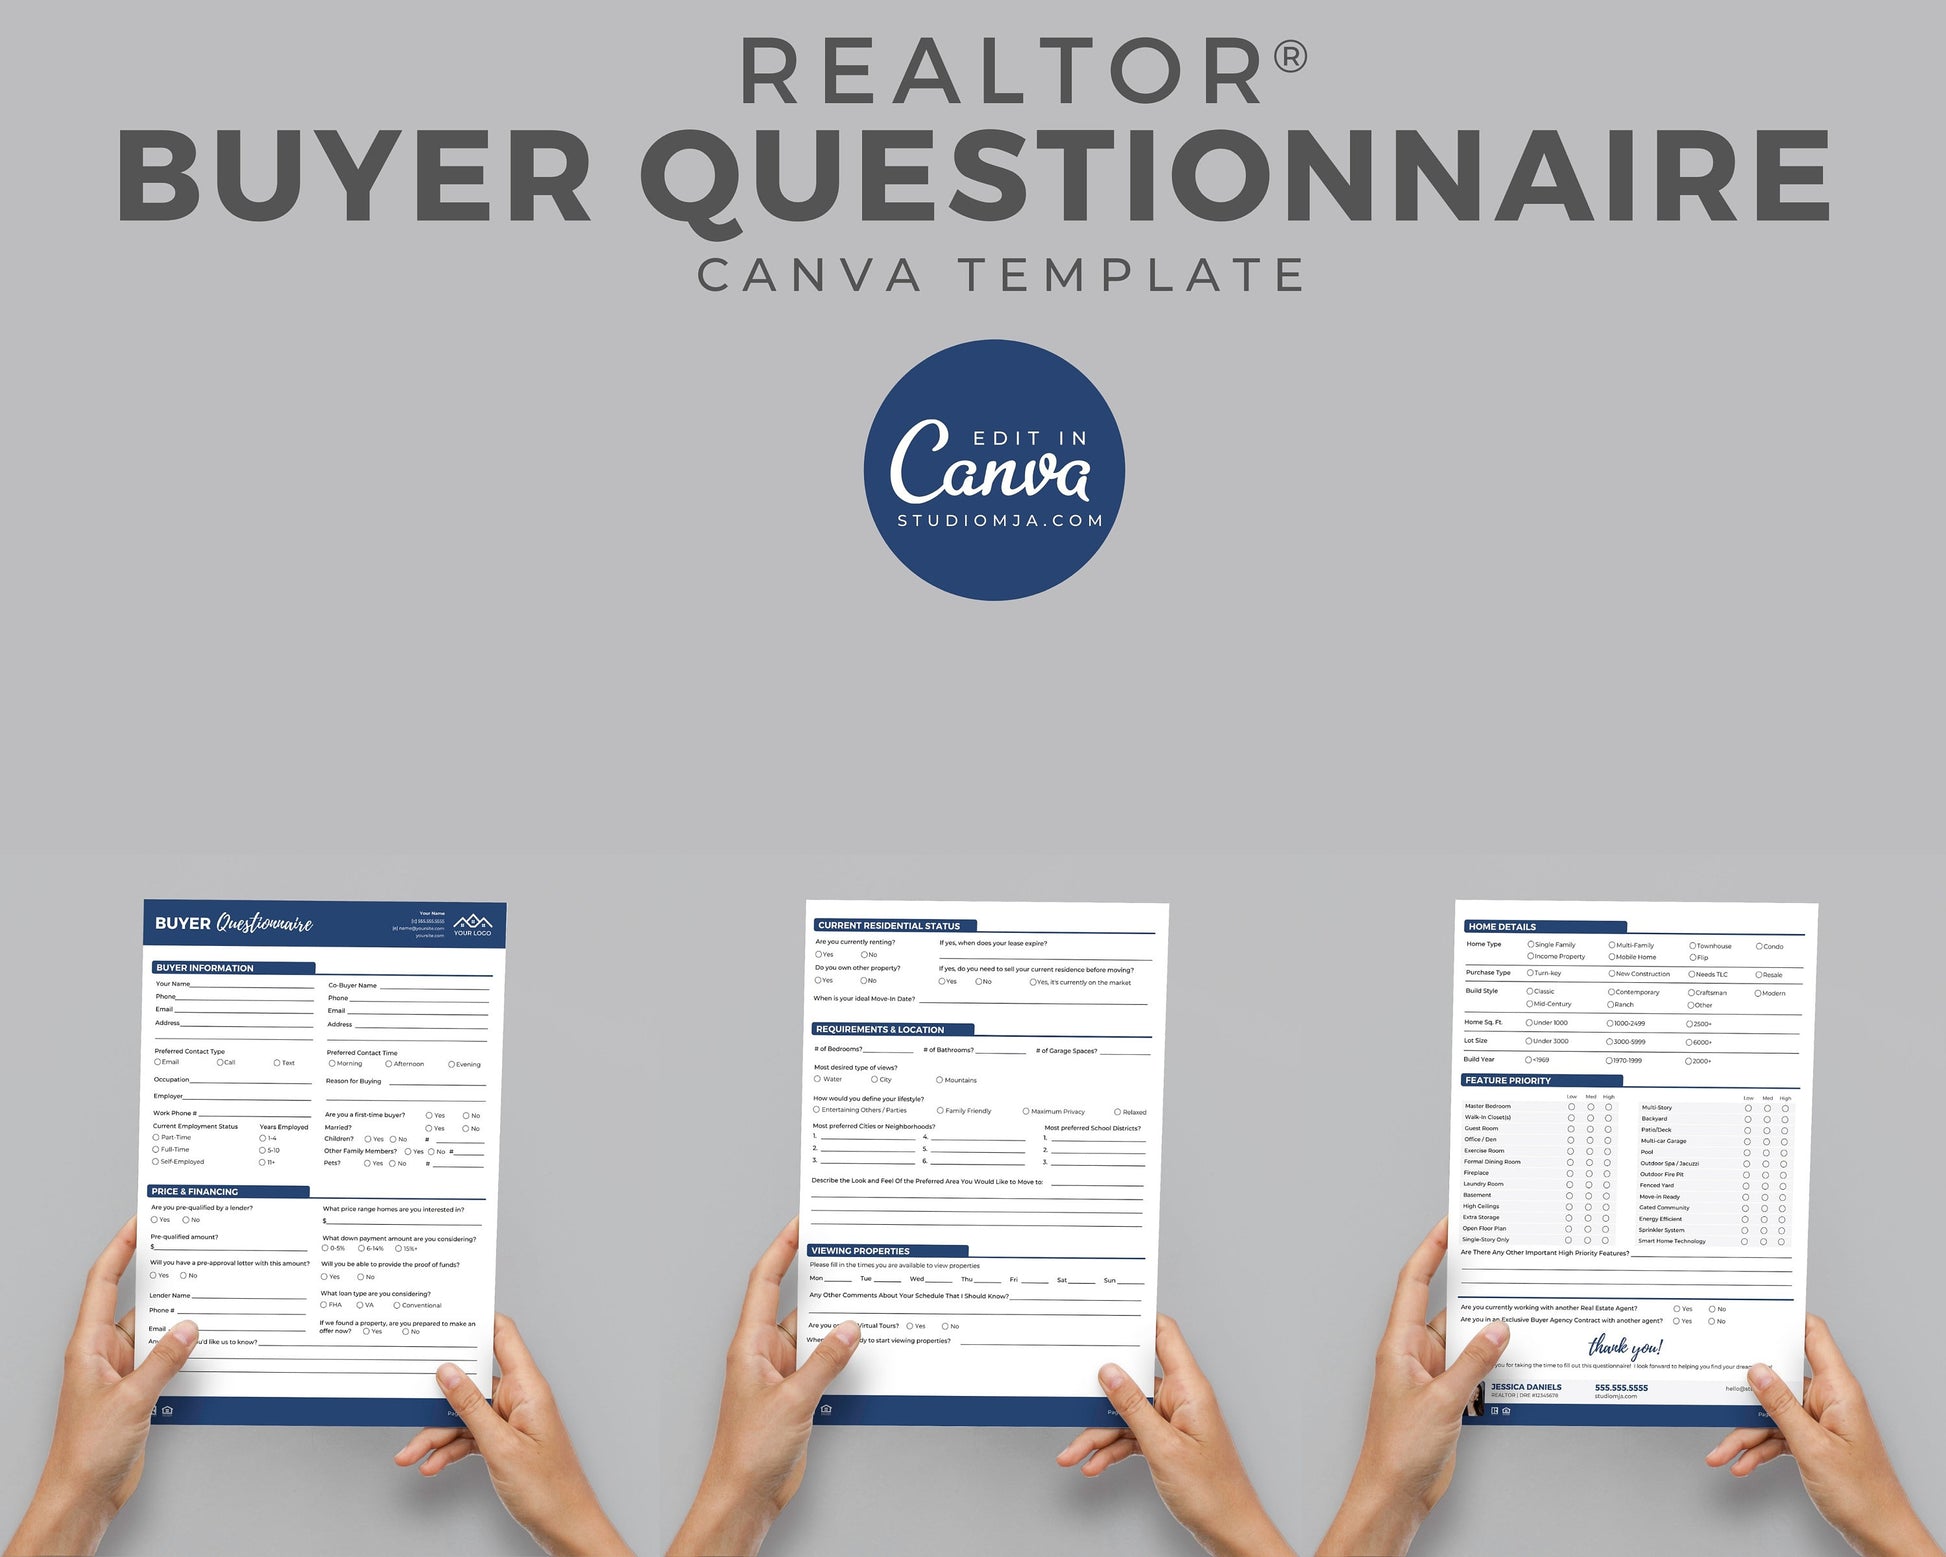 Real Estate Home Buyer's Questionnaire, Seller Questionnaire, Printable, Real Estate Buyer's Guide, Canva Template, Buyer's Checklist